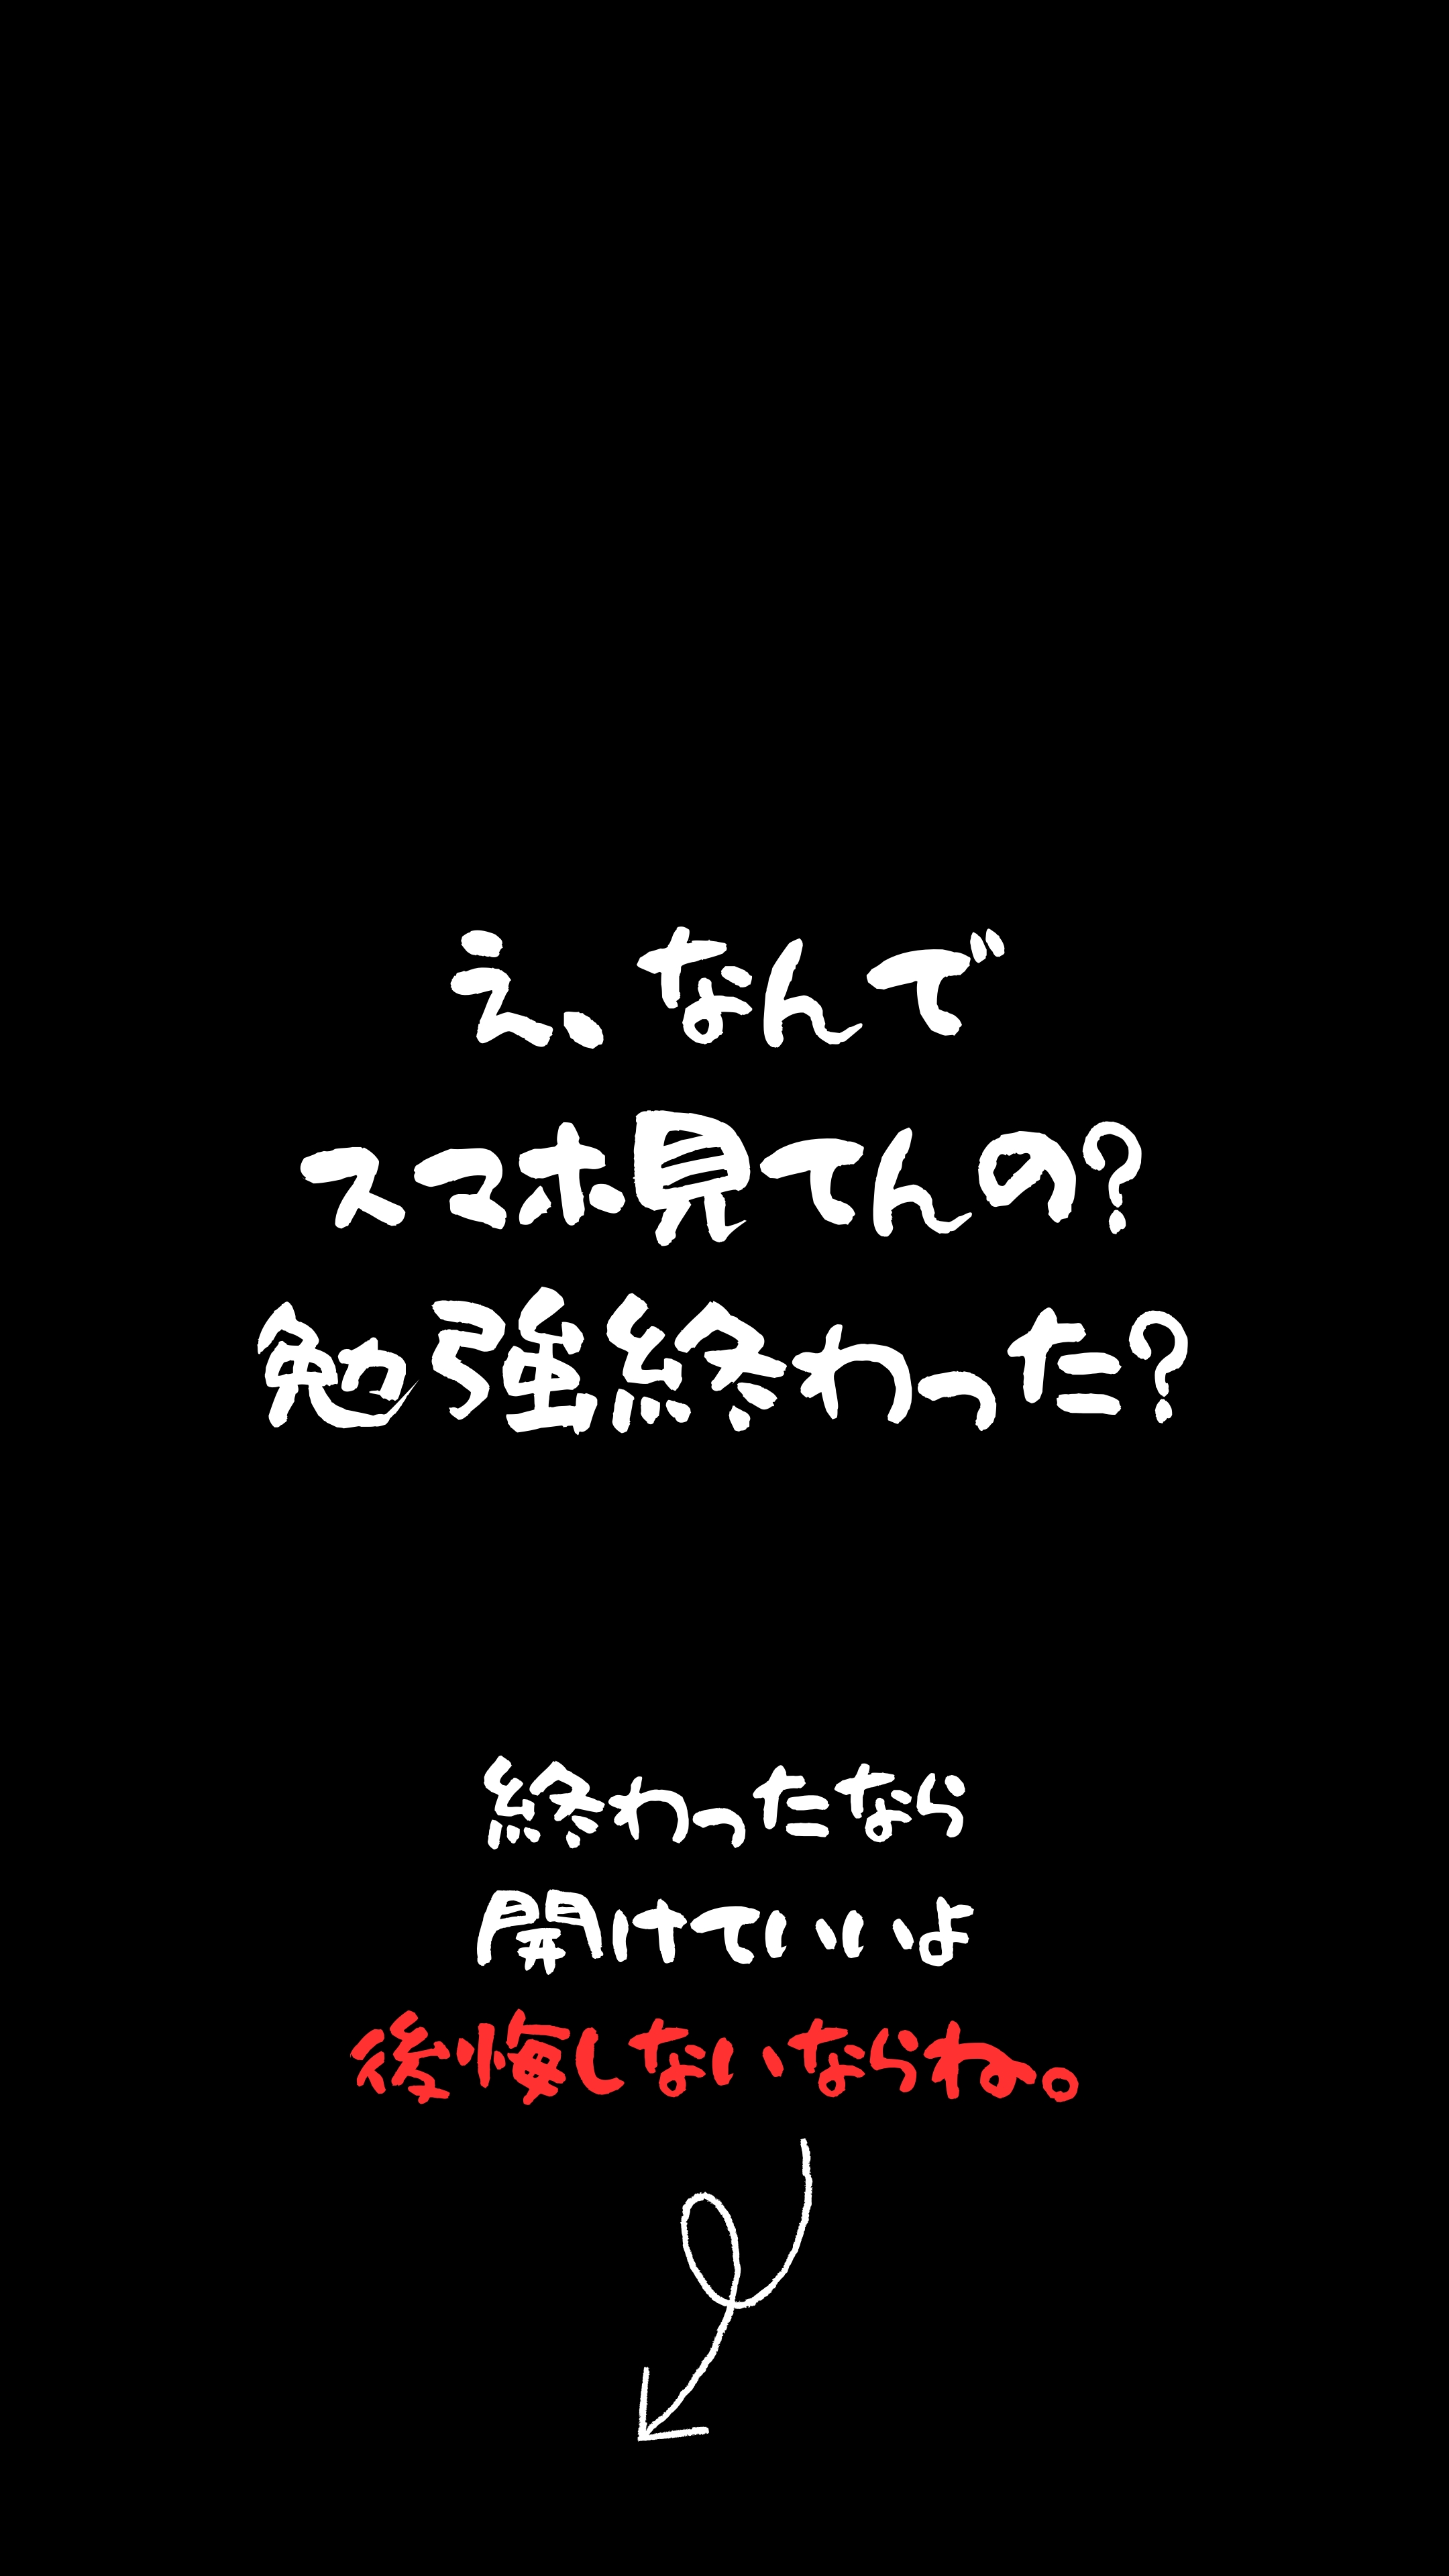 Mysterious Handwritten Japanese Question on Black Обои[5ae7481a6d774cc0a166]